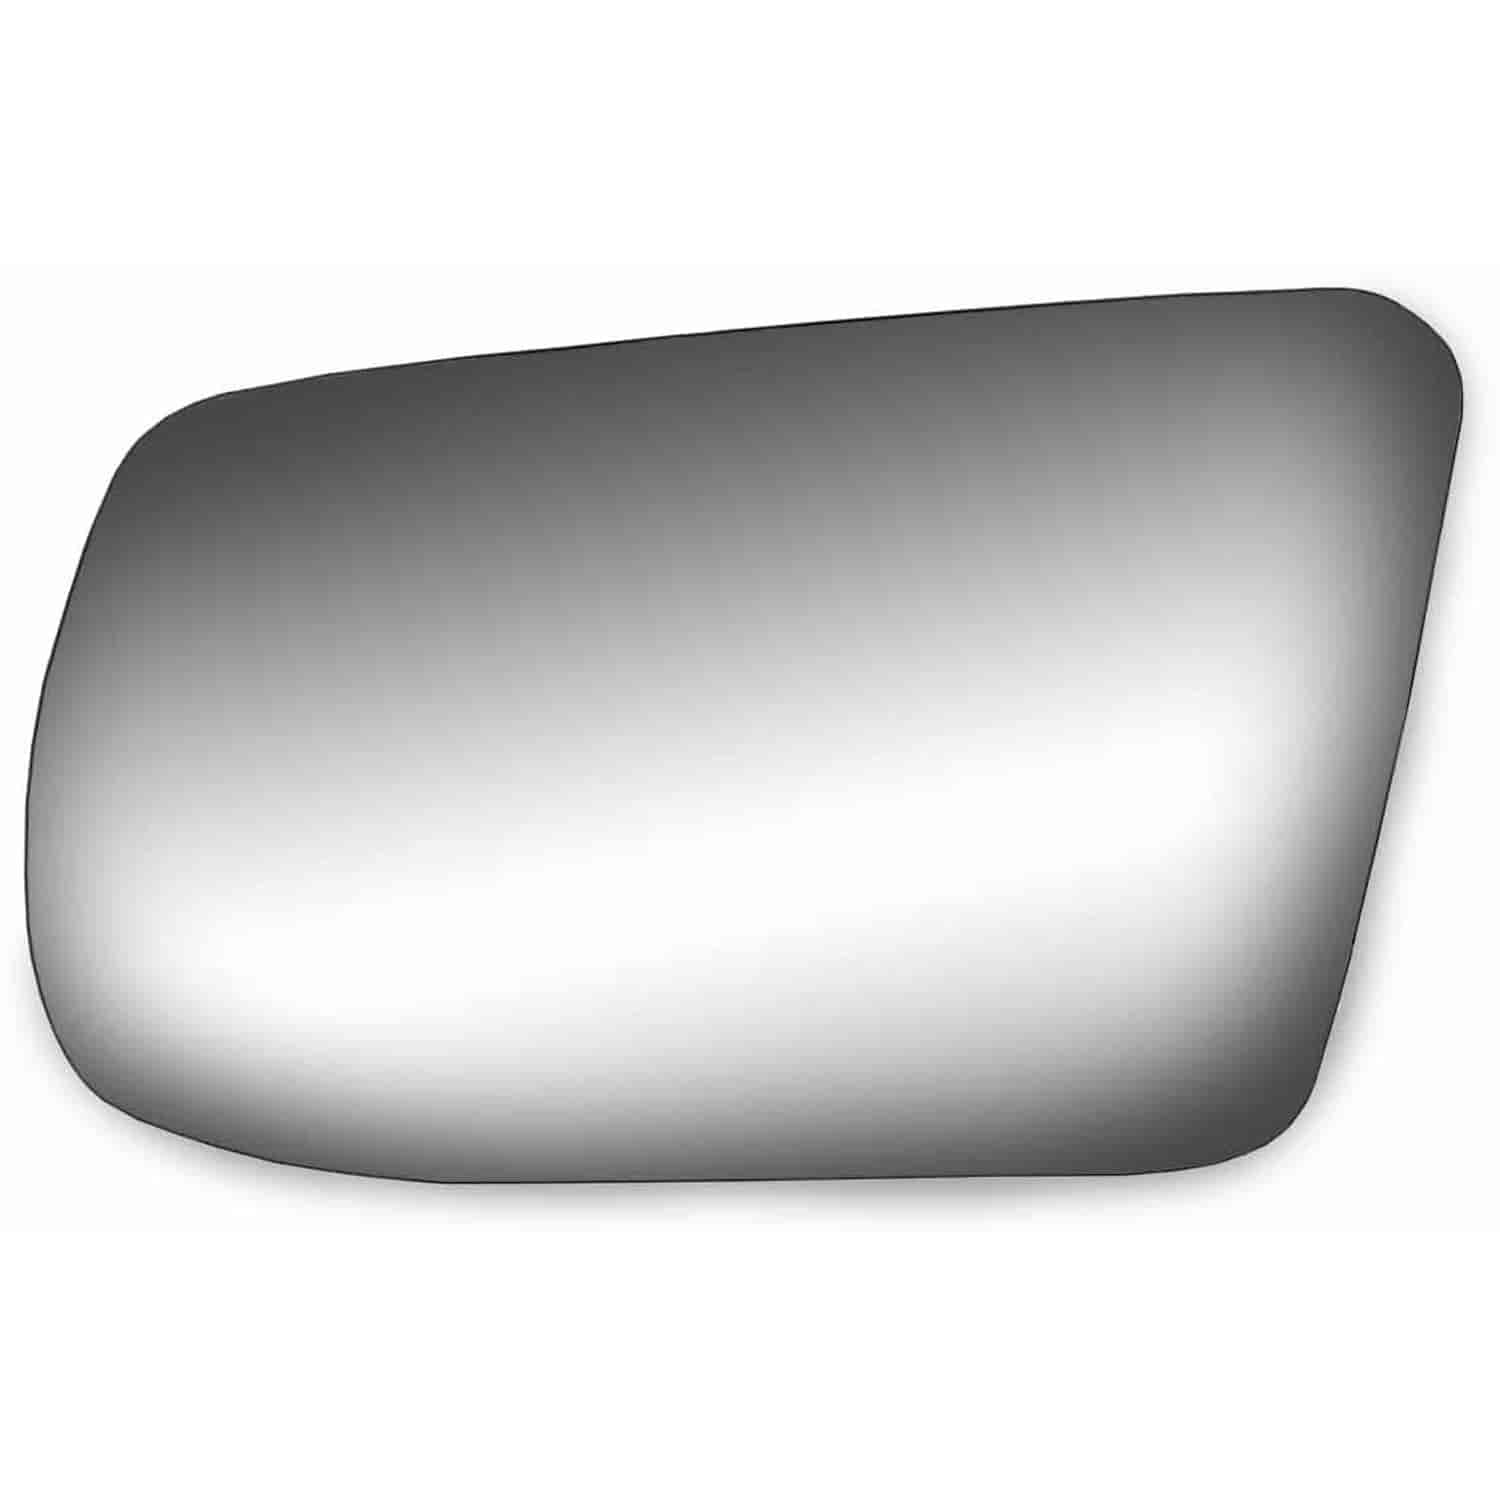 Replacement Glass for 08-13 Altima Coupe non-foldaway ; 07-11 Altima Hybrid foldaway ; 07-12 Altima